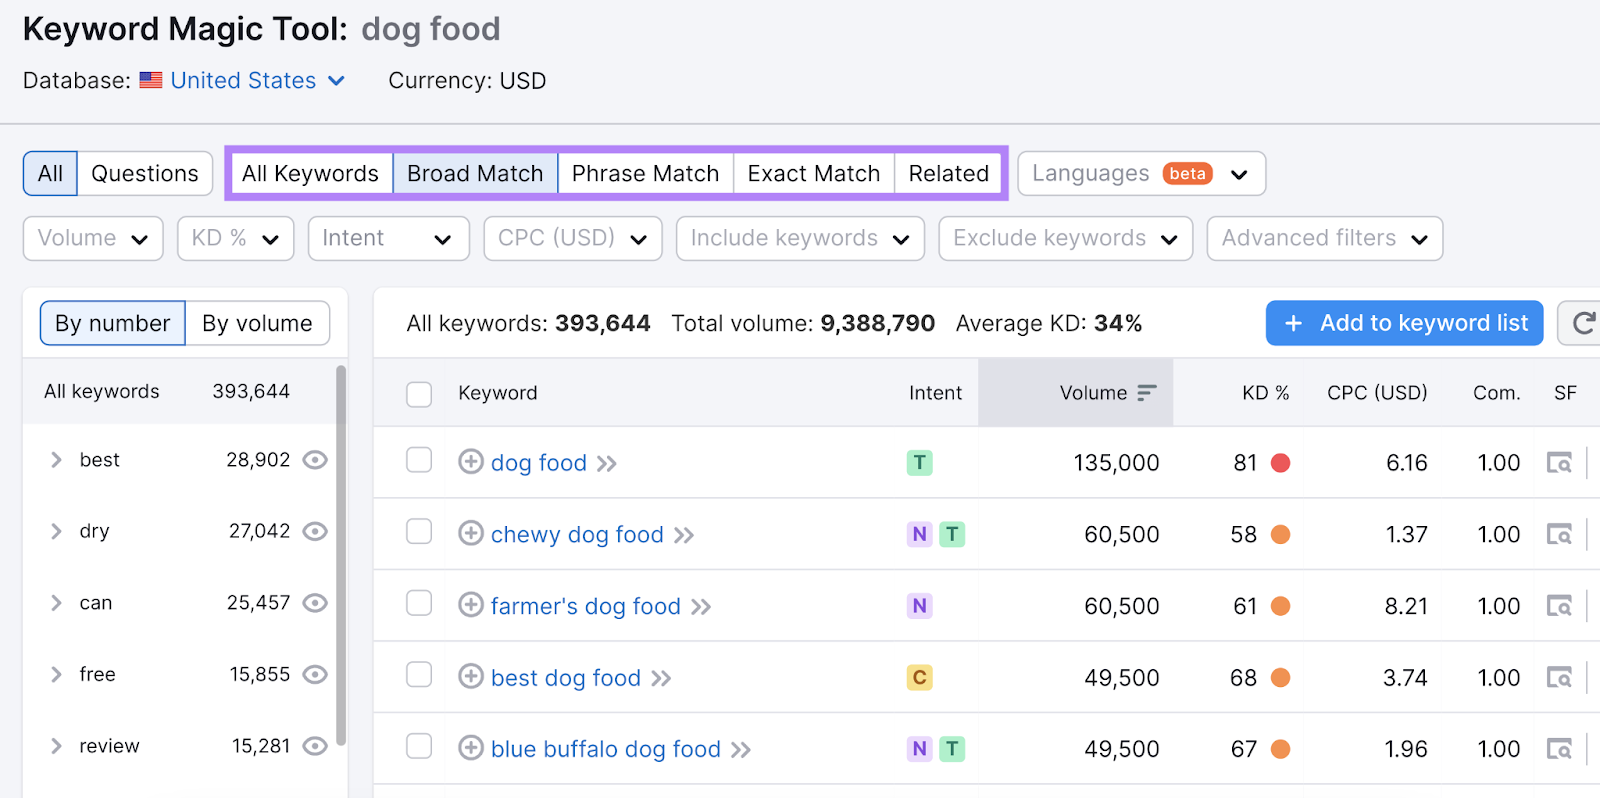 "All Keywords," "Broad Match," "Phrase Match," "Exact Match," and "Related" results highlighted in Keyword Magic Tool